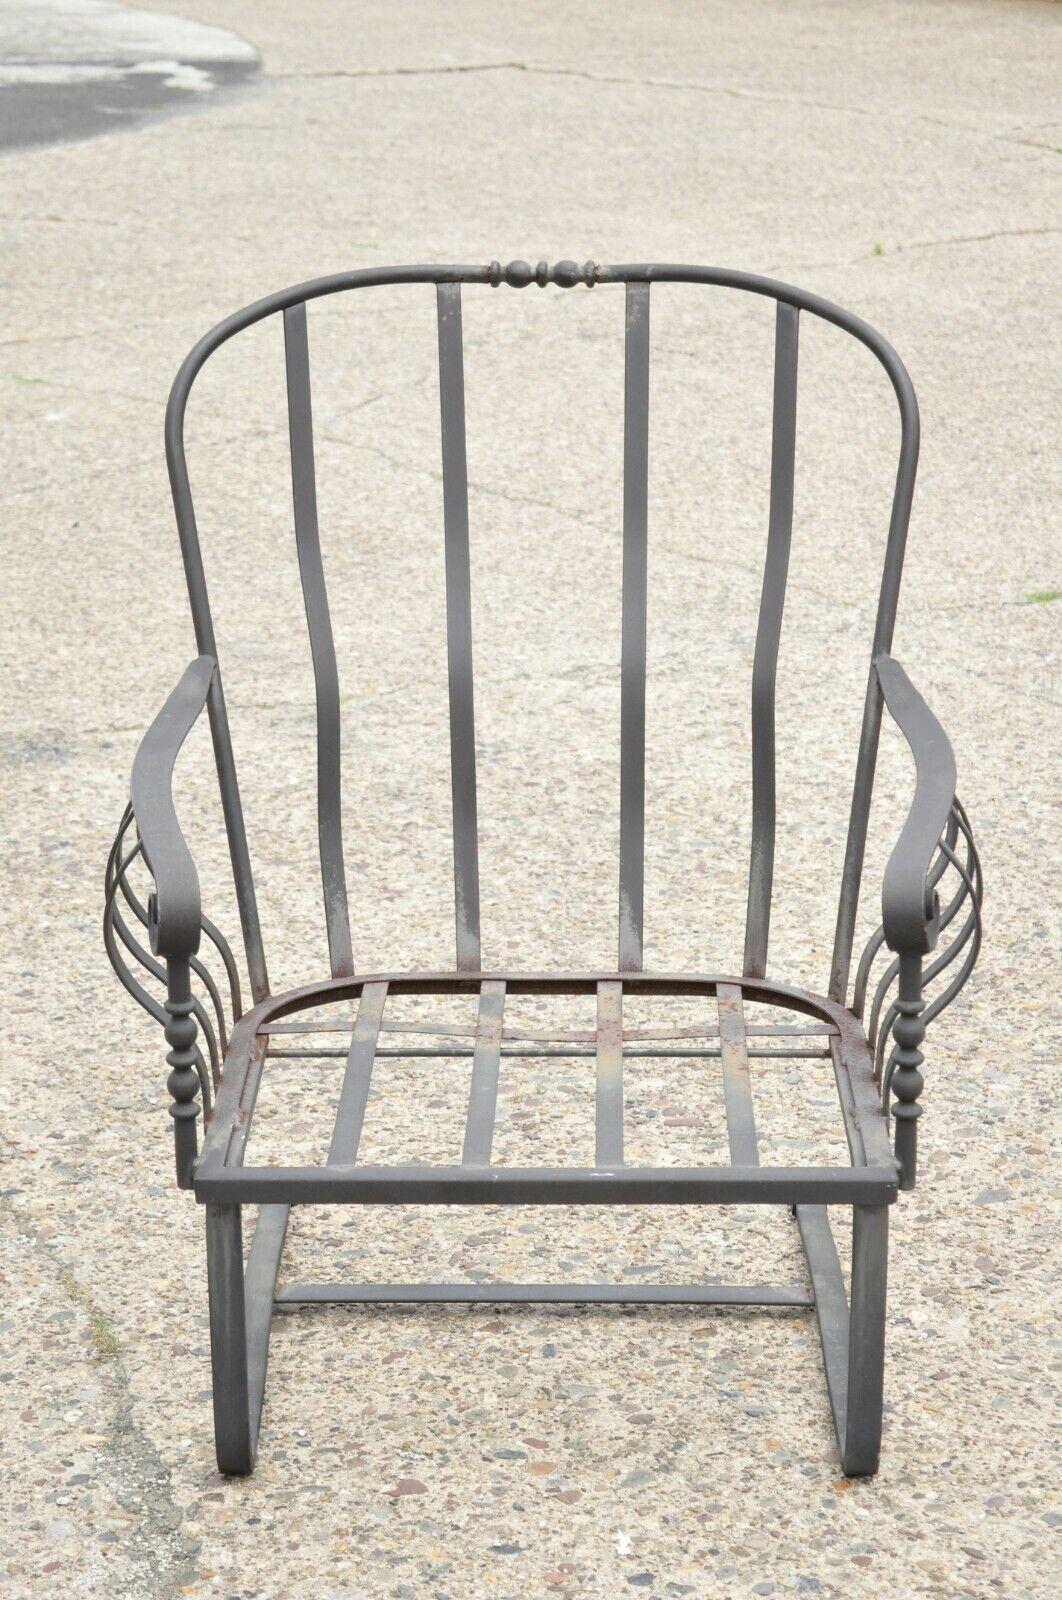 Meadowcraft Athens Deep Seating Wrought Iron High Back Spring Patio Lounge Chair im Angebot 5